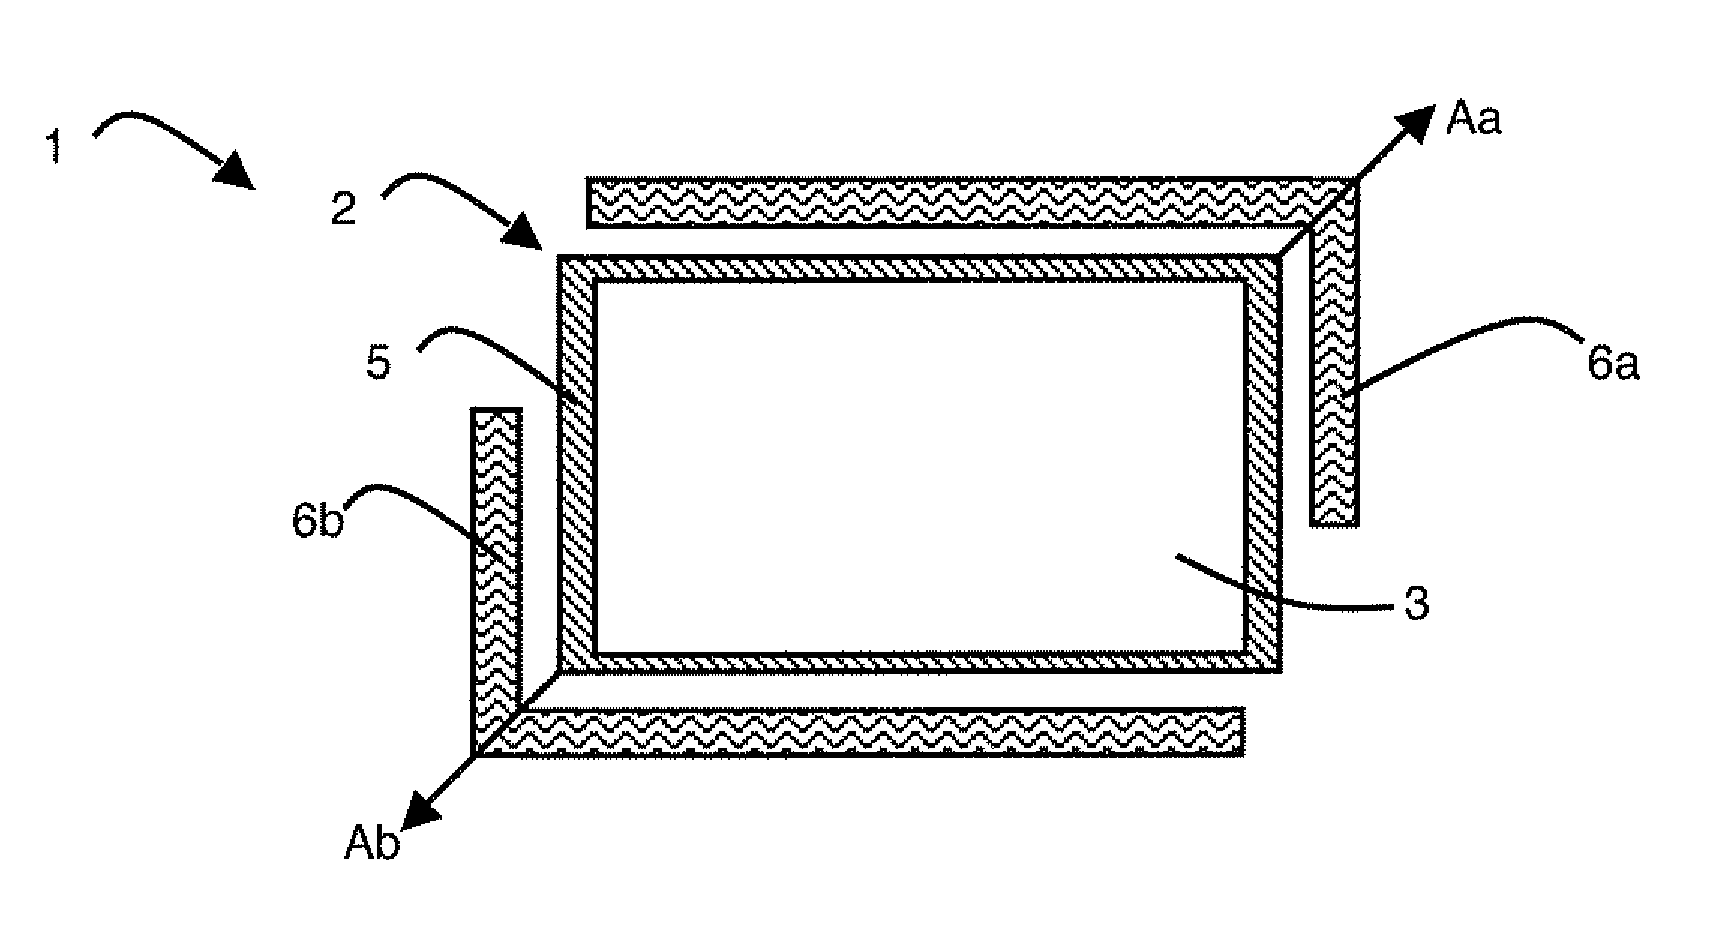 Melting-solidification furnace with variable heat exchange via the side walls